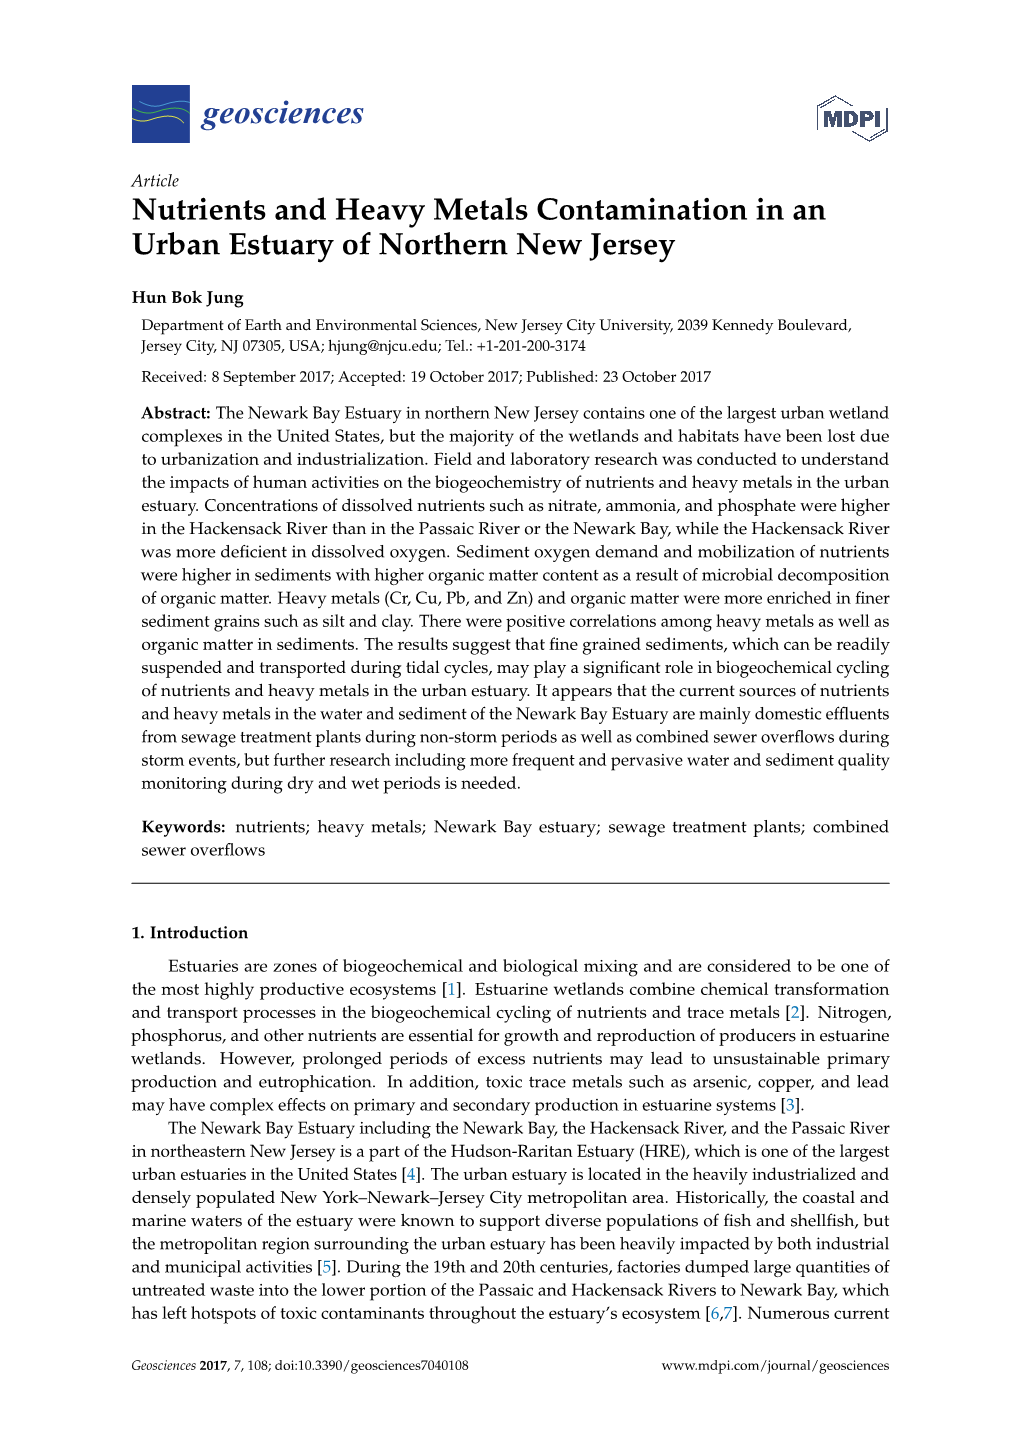 Nutrients and Heavy Metals Contamination in an Urban Estuary of Northern New Jersey